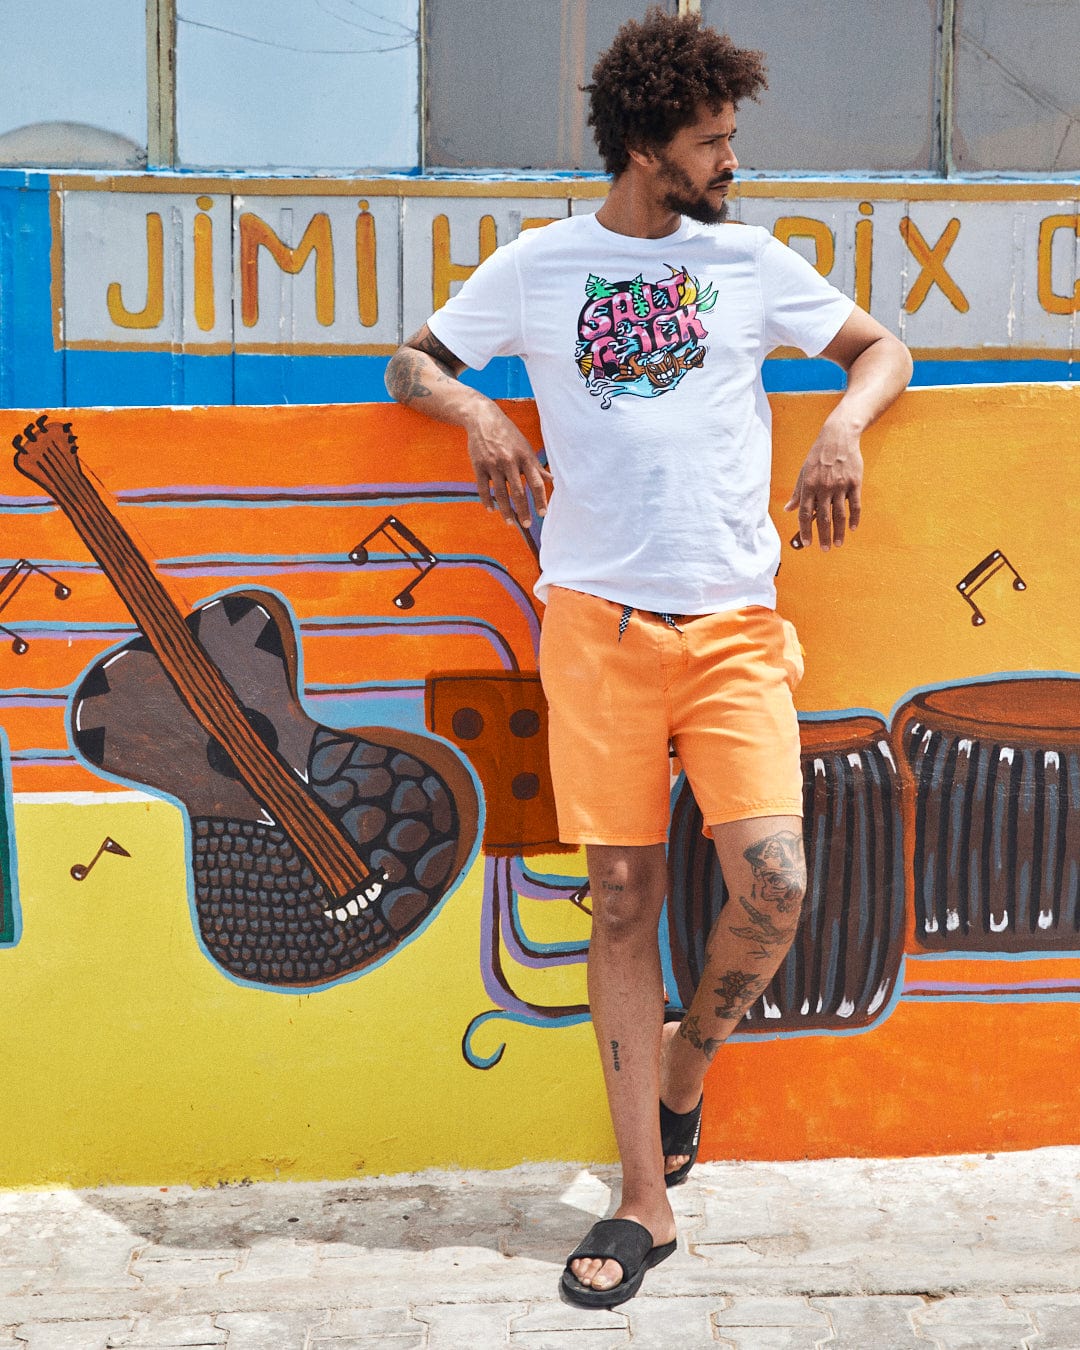 A man in a Saltrock Tahiti - Mens Short Sleeve T-Shirt - White and orange shorts stands in front of a brightly colored mural featuring musical instruments, resembling a vibrant Saltrock illustration.